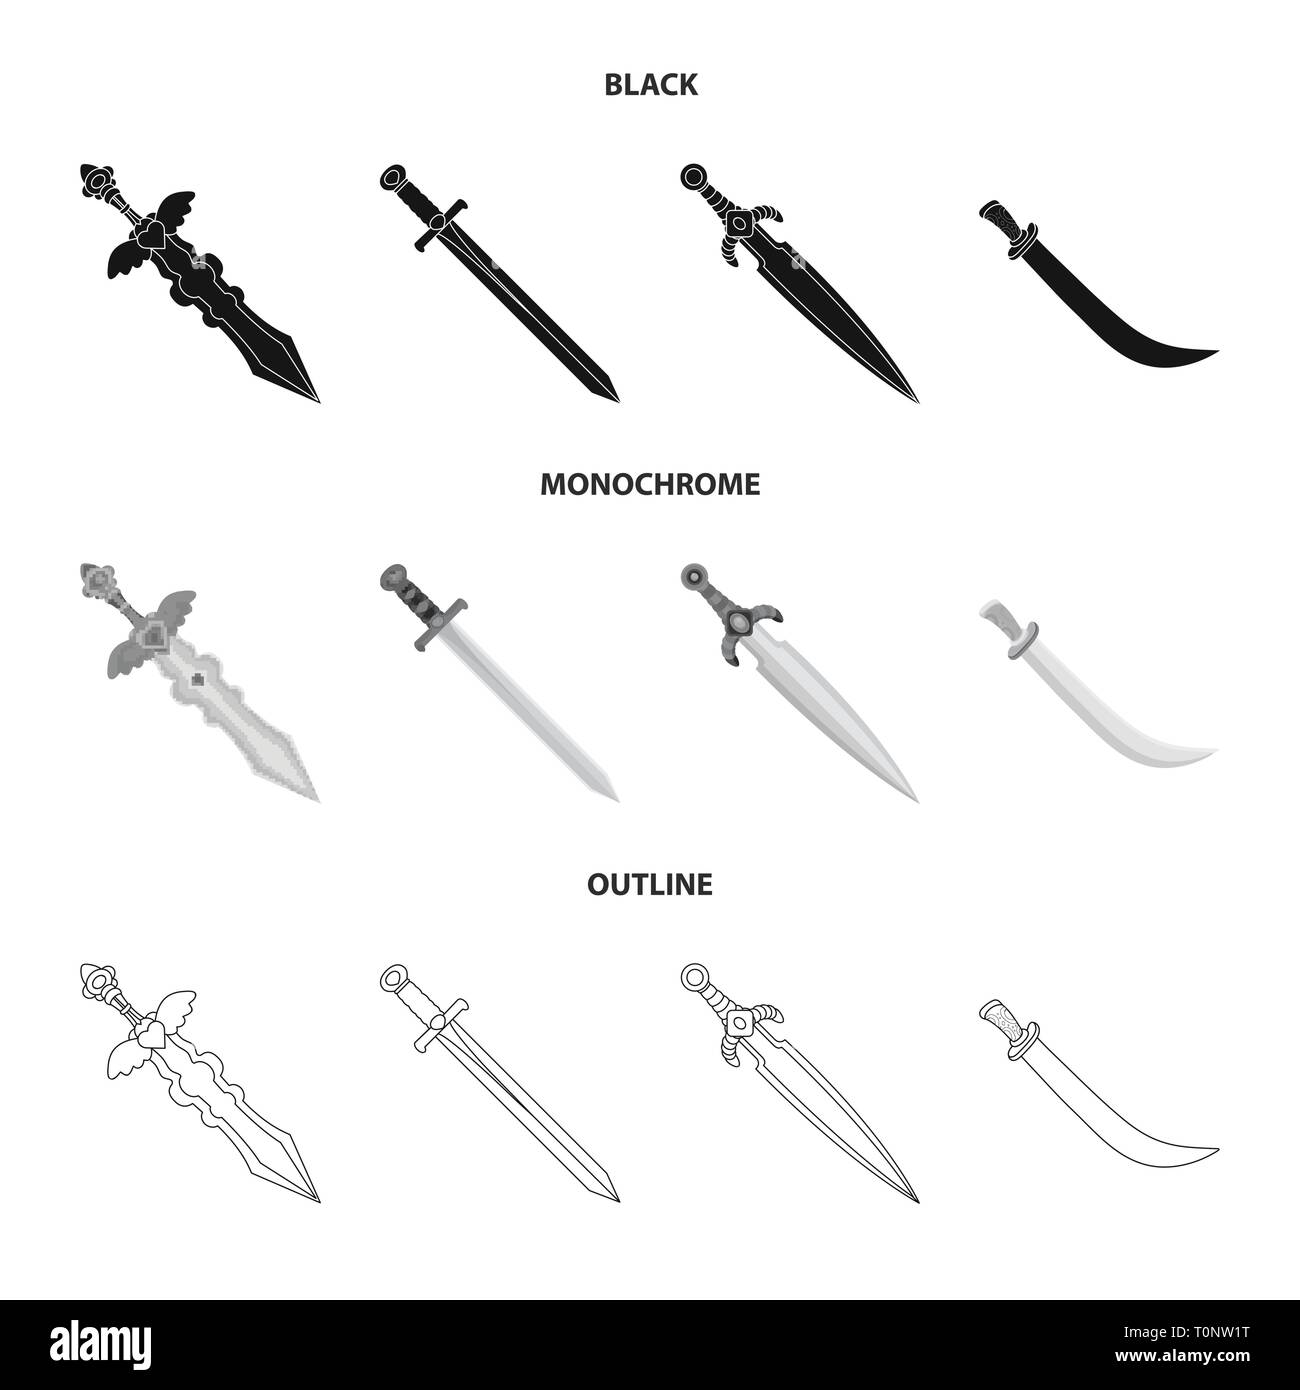 handle,longsword,Spanish,scimitar,decoration,templar,conqueror,wings,battle,ruby,ancient,steel,old,gold,warrior,silver,military,ornament,soldier,stone,power,knight,murder,game,armor,sharp,blade,sword,dagger,knife,weapon,saber,medieval,set,vector,icon,illustration,isolated,collection,design,element,graphic,sign Vector Vectors , Stock Vector